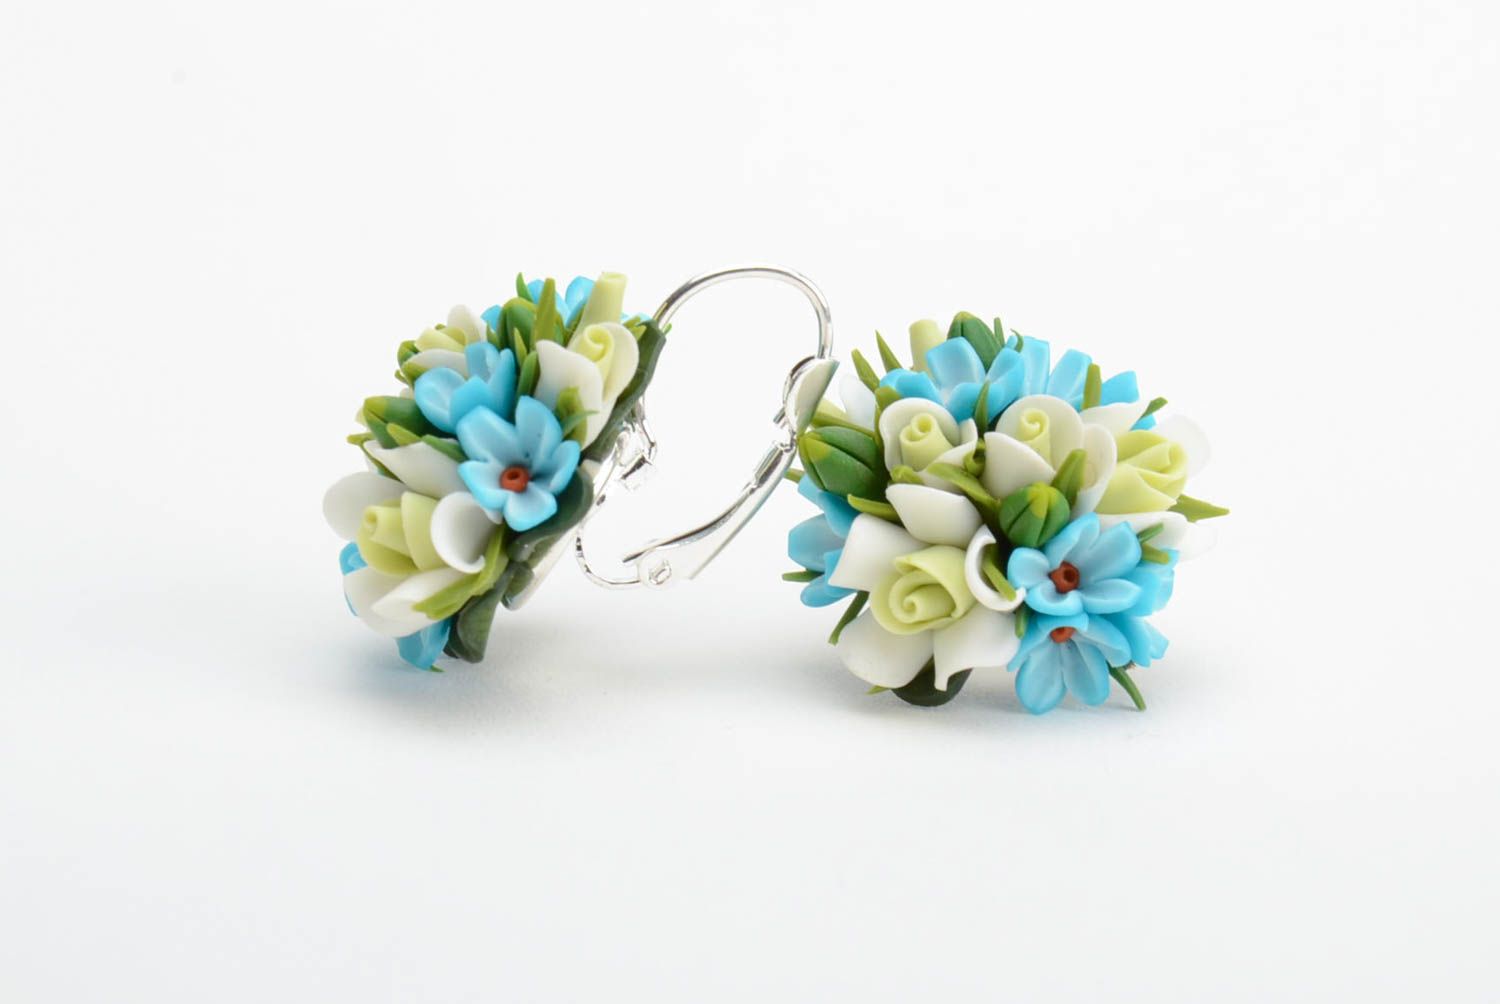 Handmade tender earrings with tiny blue and green polymer clay flowers photo 4